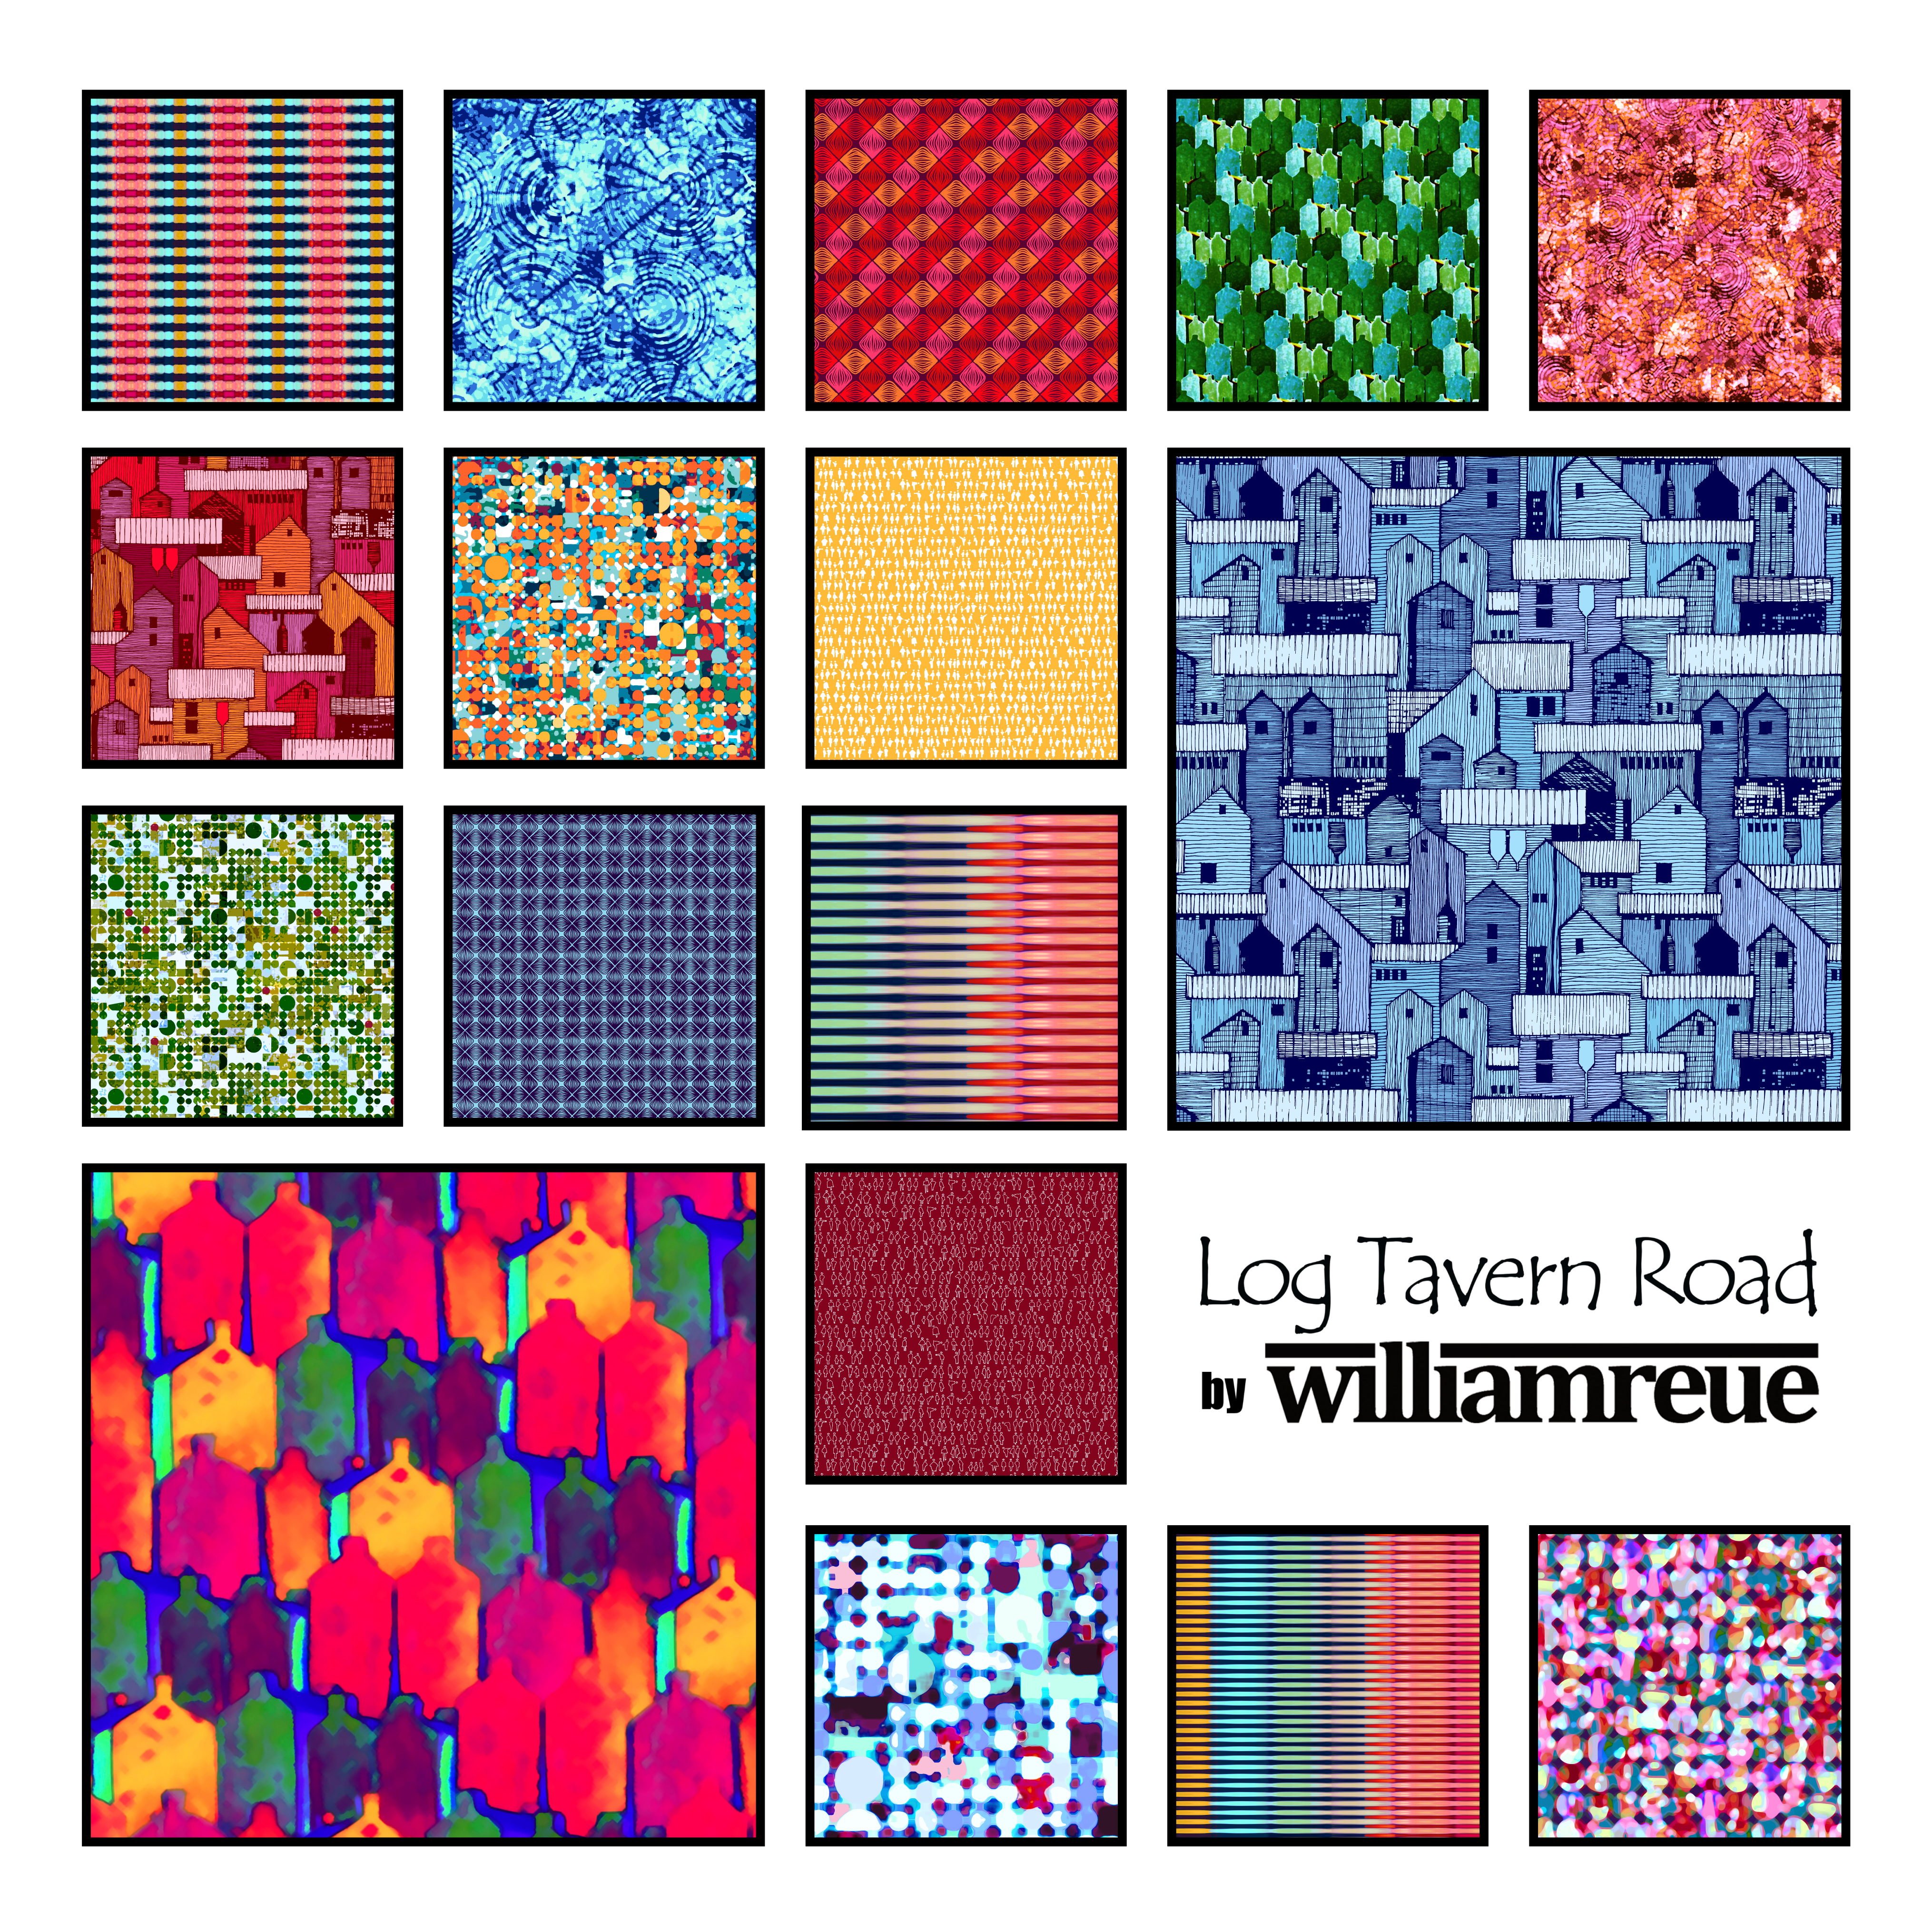 The image shows seventeen swatches from the collection “Log Tavern Road” by William Reue. This line was inspired by life in small-town America, featuring prints of human figures, depictions of nature, and shapes and colors found in domestic architecture.